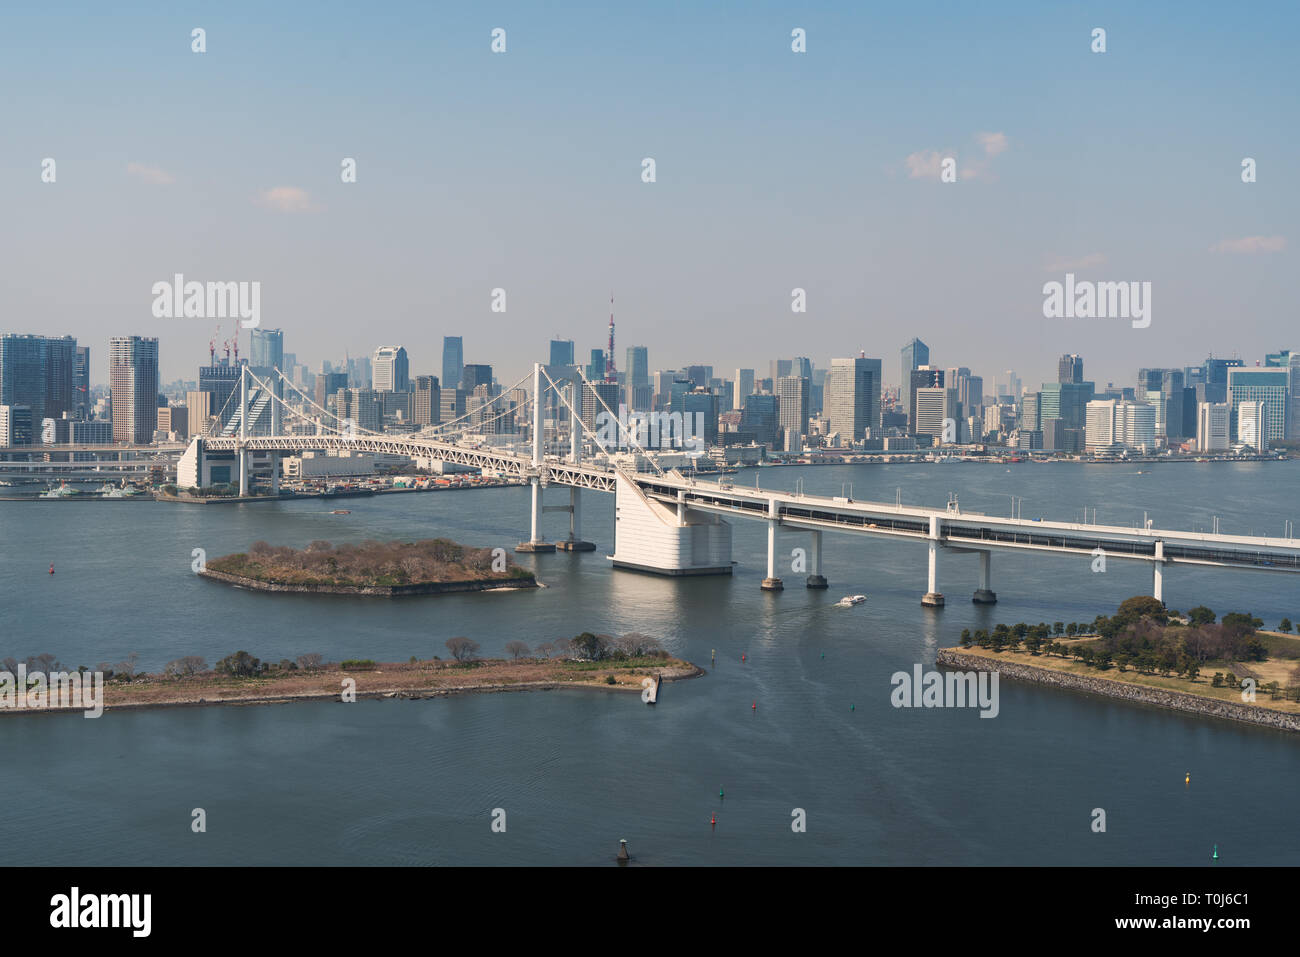 Tokyo Bay with a view of the Tokyo skyline and Rainbow Bridge in tokyo, Japan. Stock Photo